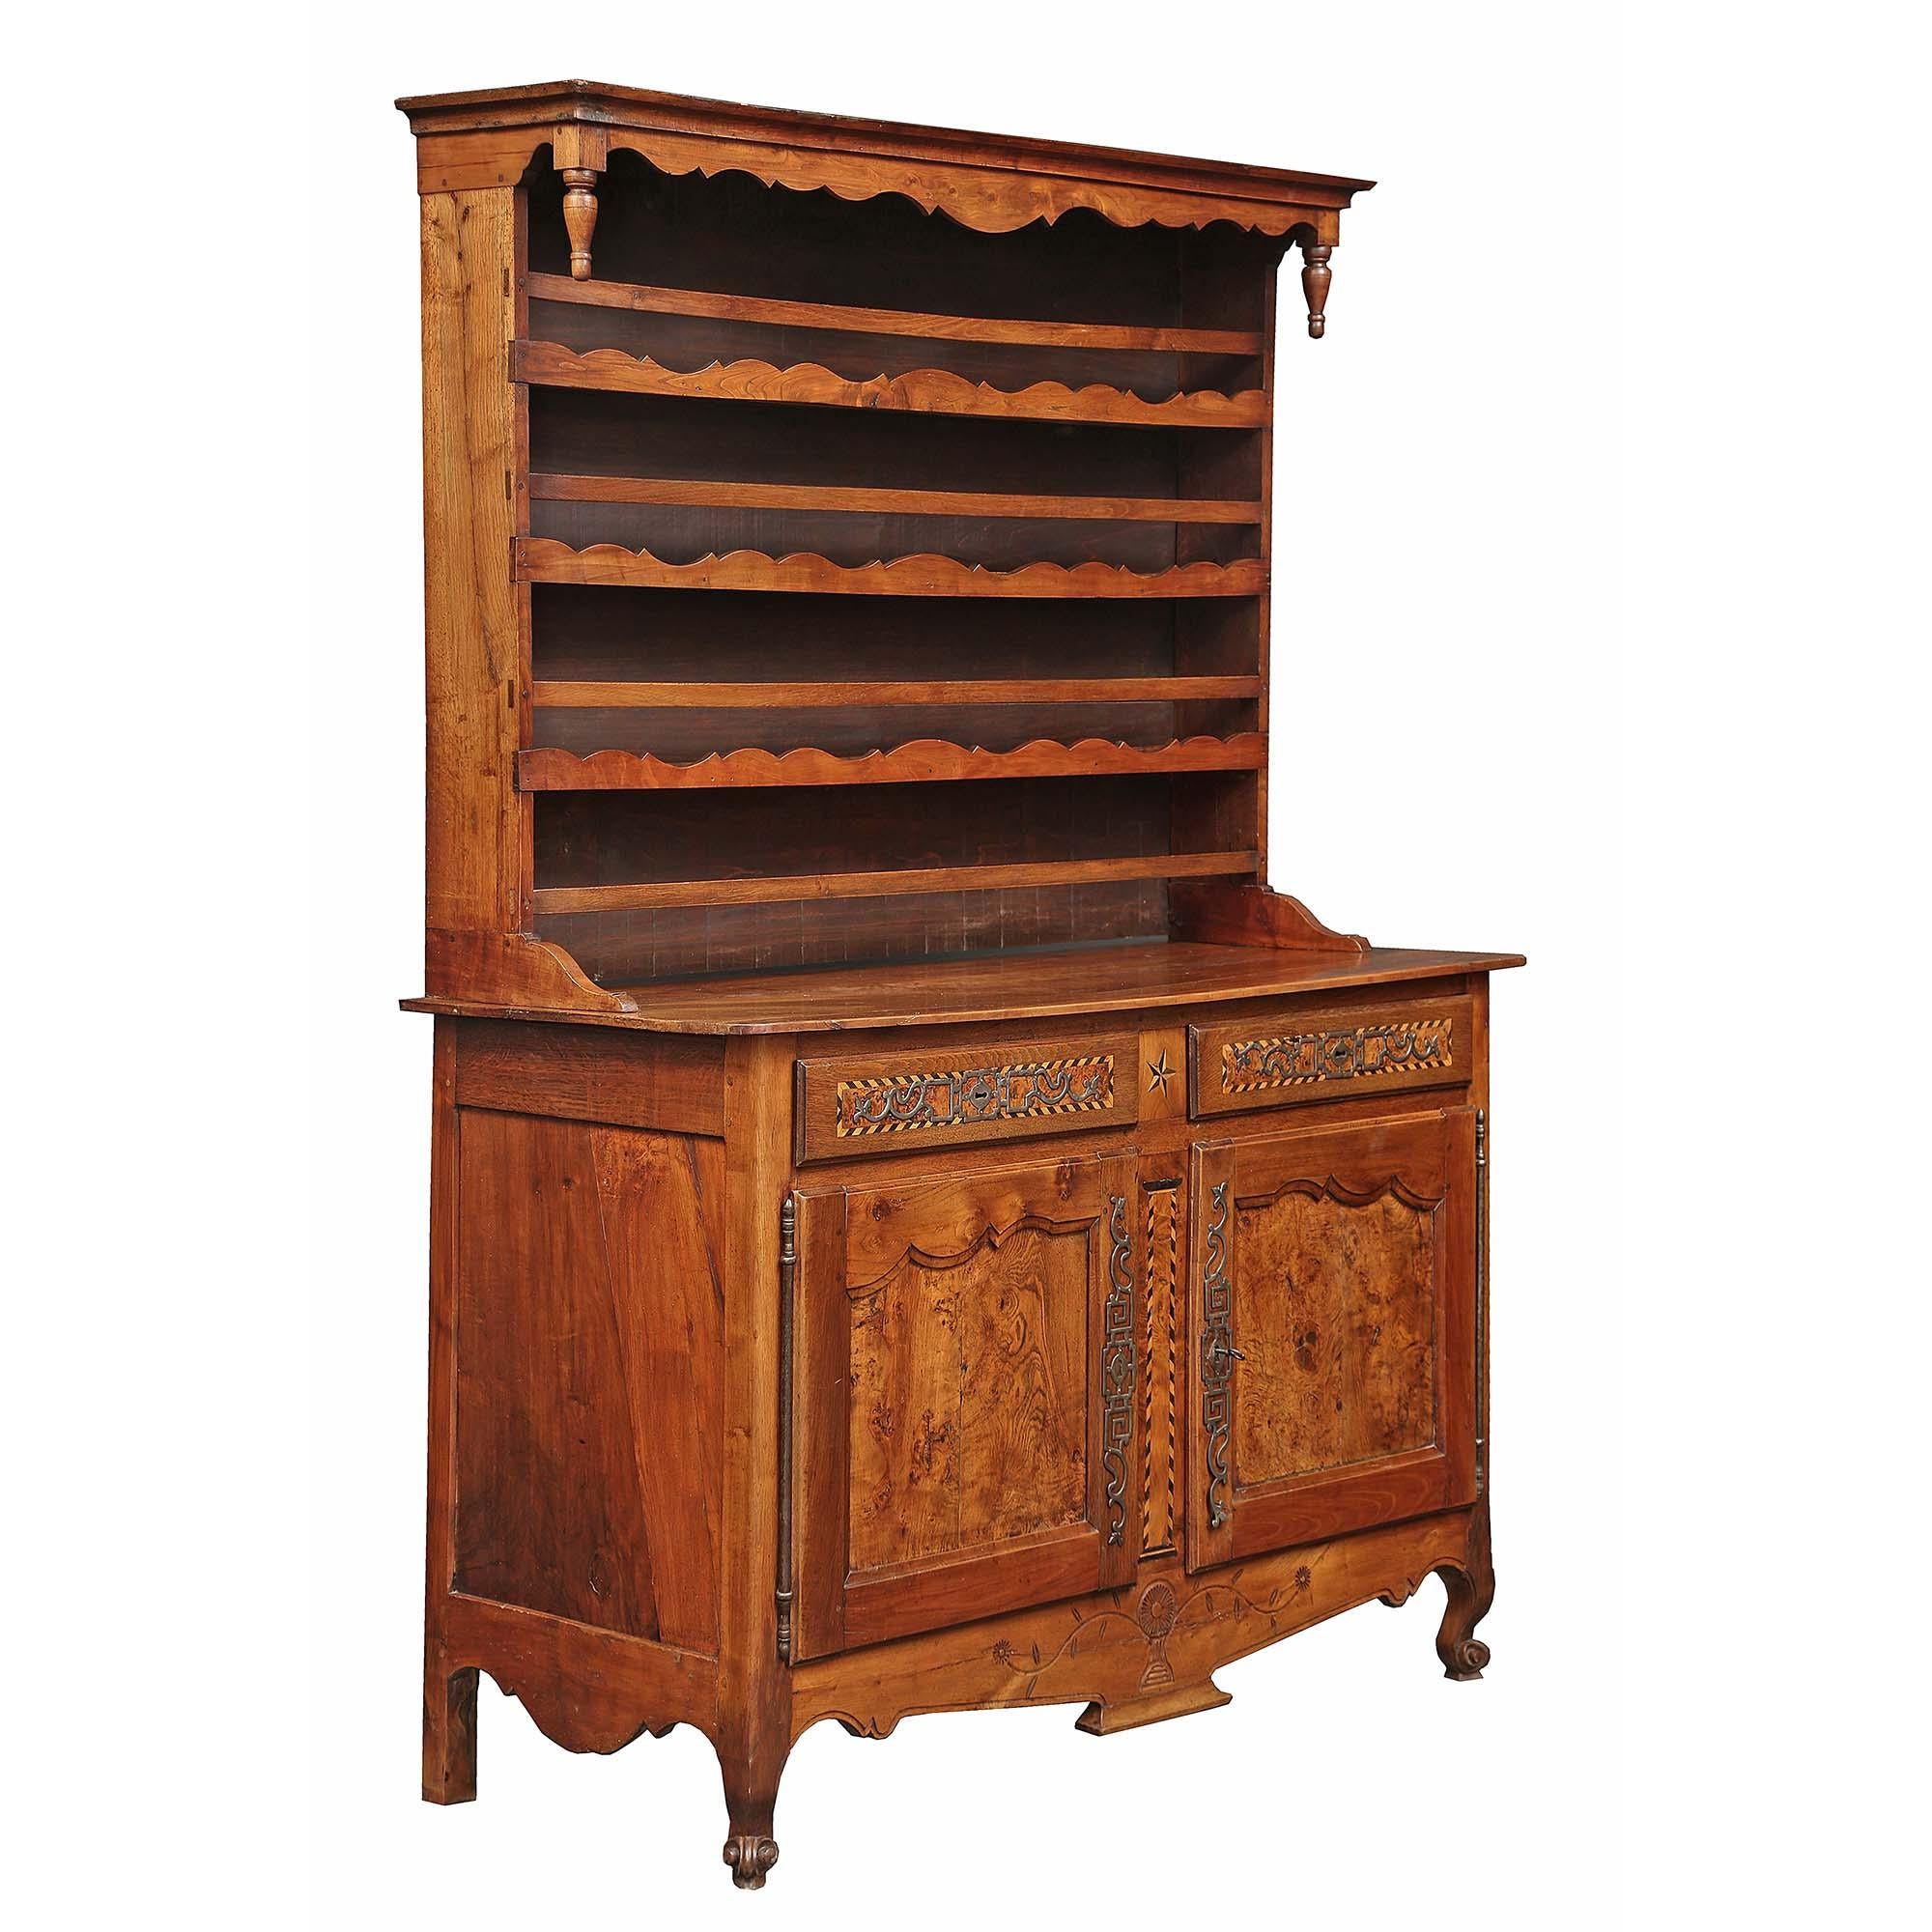 French 18th Century ‘Vaissellier’ in Walnut, Lemon Wood and Burl Walnut In Good Condition For Sale In West Palm Beach, FL